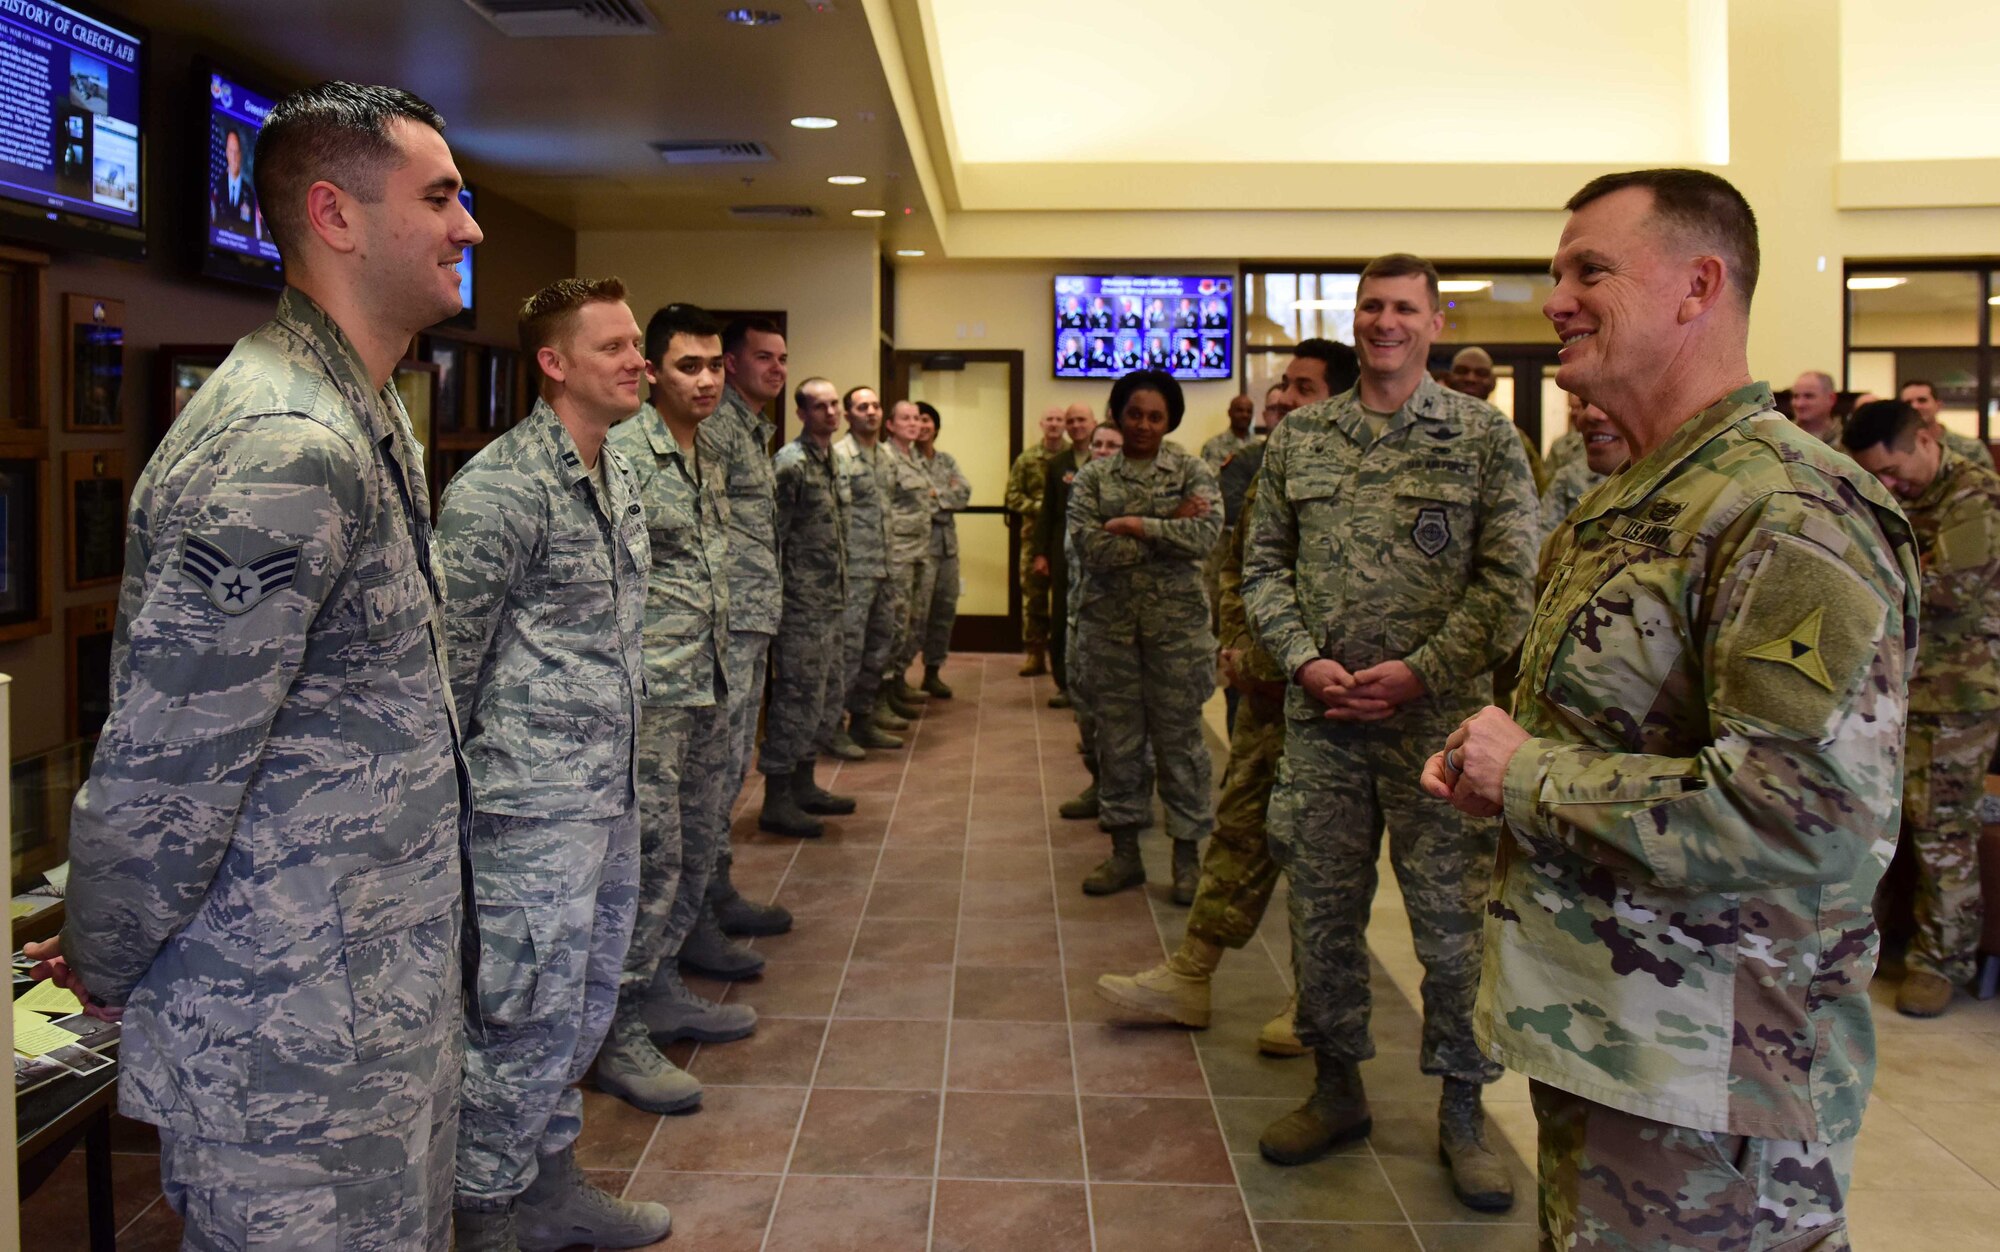 U.S. Army Lt. Gen. Paul Funk, III Armored Corps and Fort Hood, Texas, commanding general recognizes Creech Airmen for exemplary job performance at Creech Air Force Base, Nevada, Dec. 10, 2018. This visit was an opportunity for Funk to meet with the Remotely Piloted Aircraft Airmen who fly, maintain and support the MQ-9 Reaper that has been providing airstrike capabilities for his ground troops since the start of Operation Inherent Resolve in June 2014. (U.S. Air Force Photo by Airman 1st Class Haley Stevens)